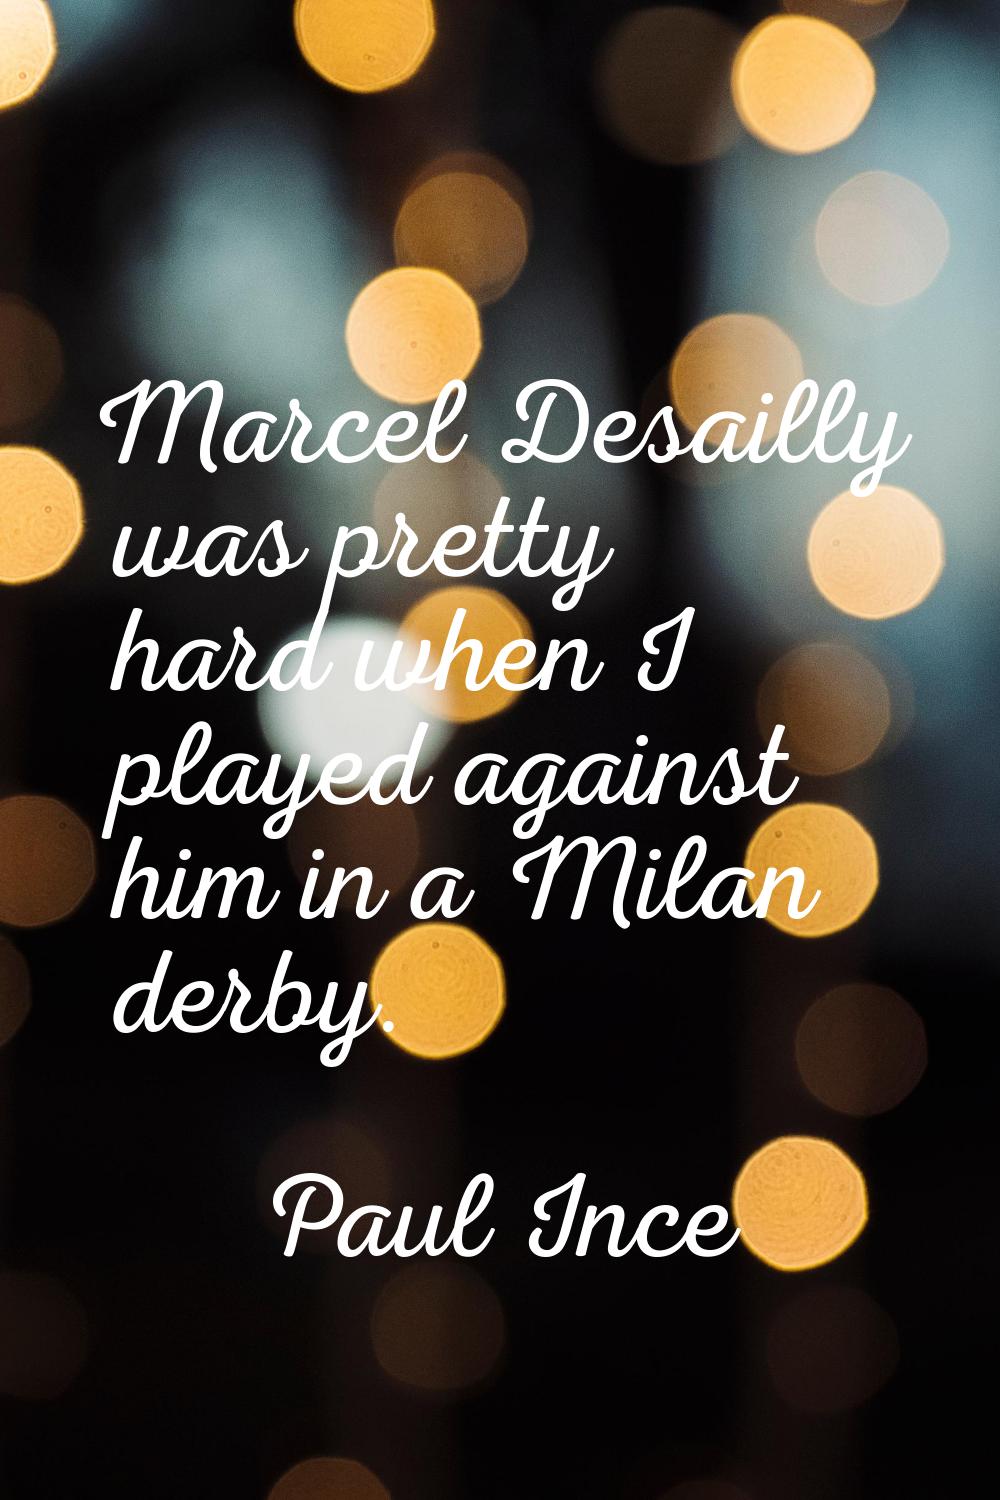 Marcel Desailly was pretty hard when I played against him in a Milan derby.